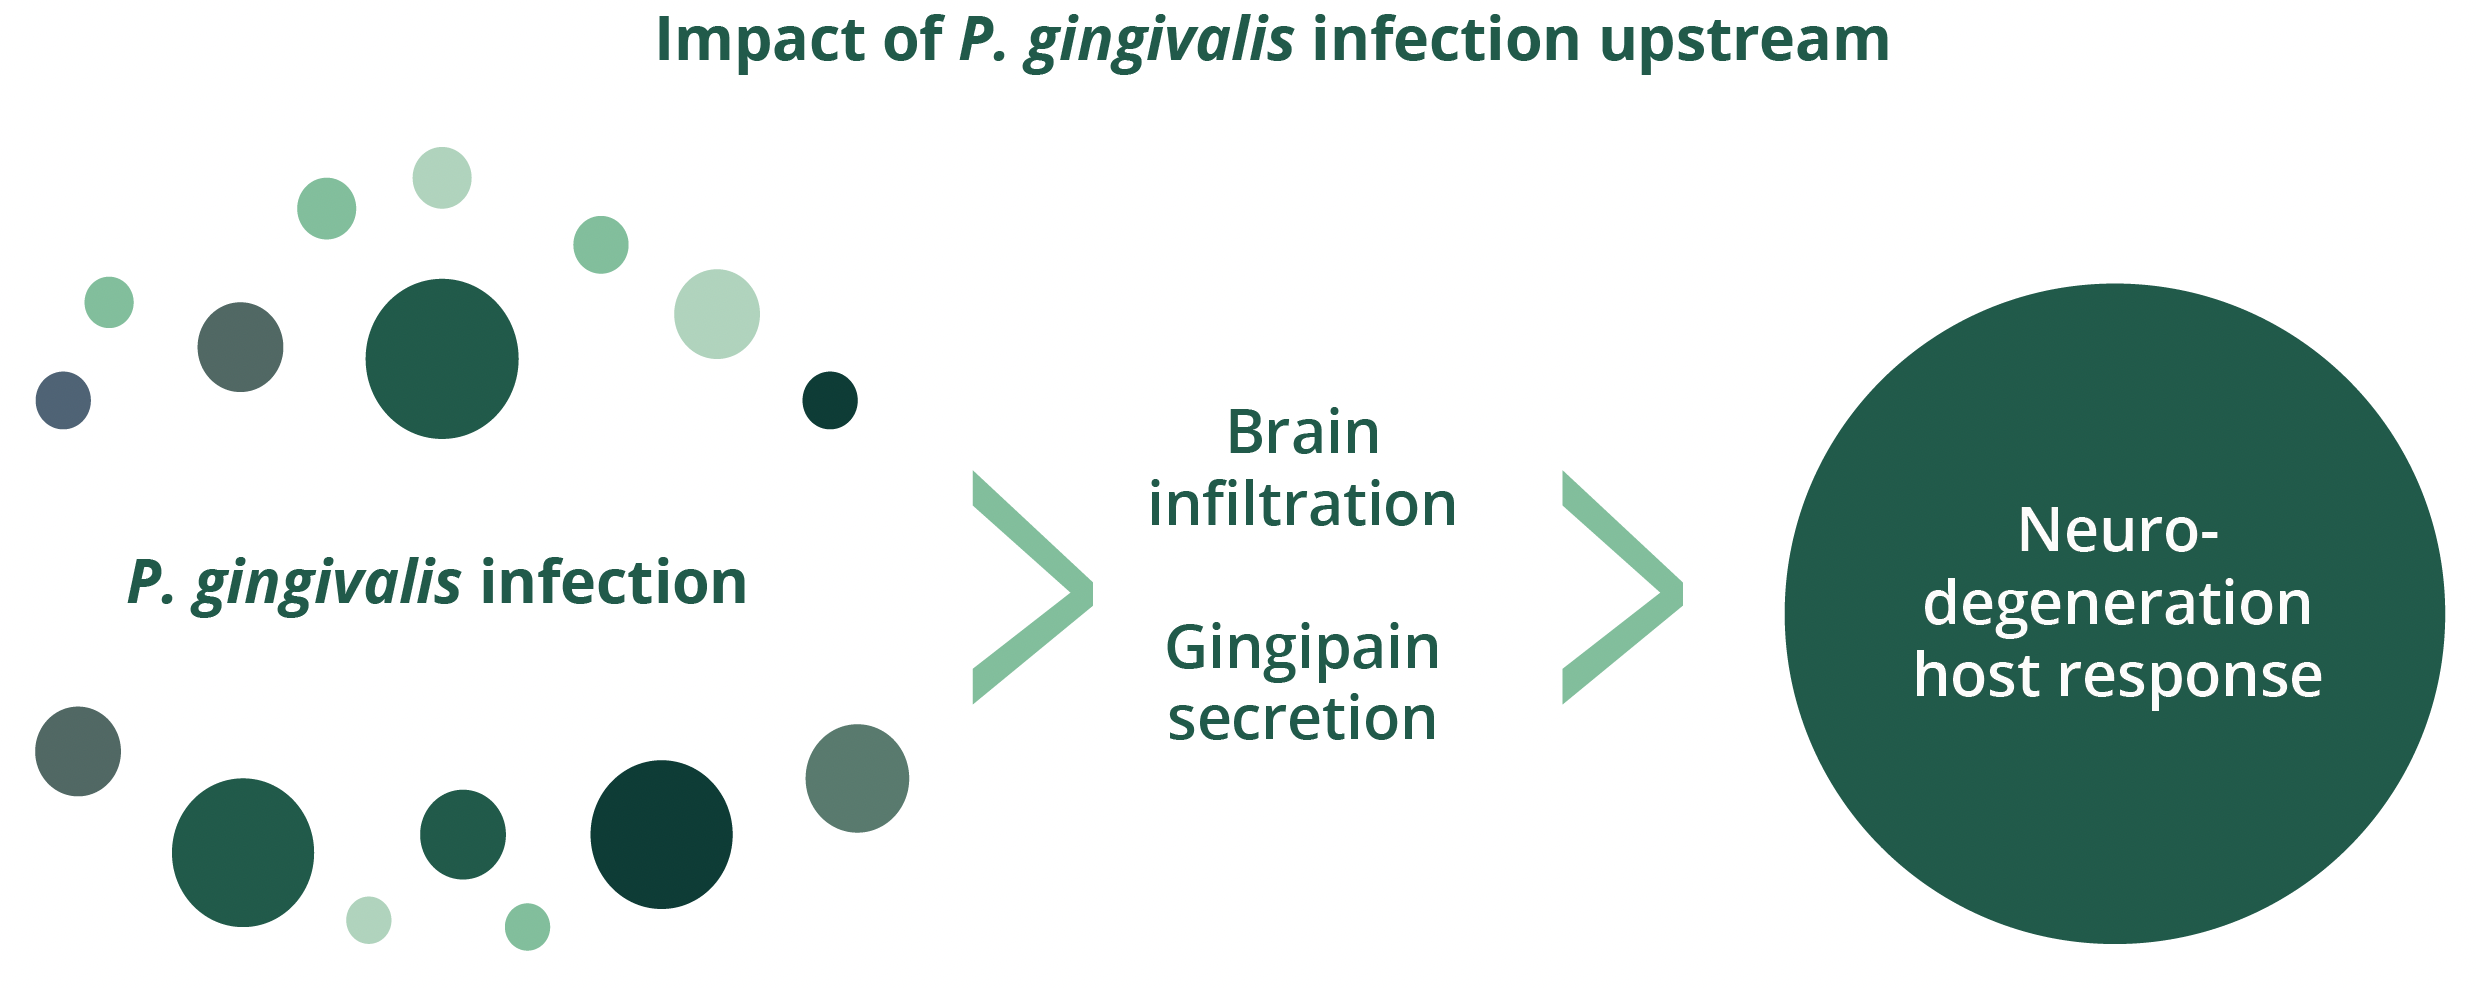 Impact of P. gingivalis infection including brain infiltration and gingipain secretion